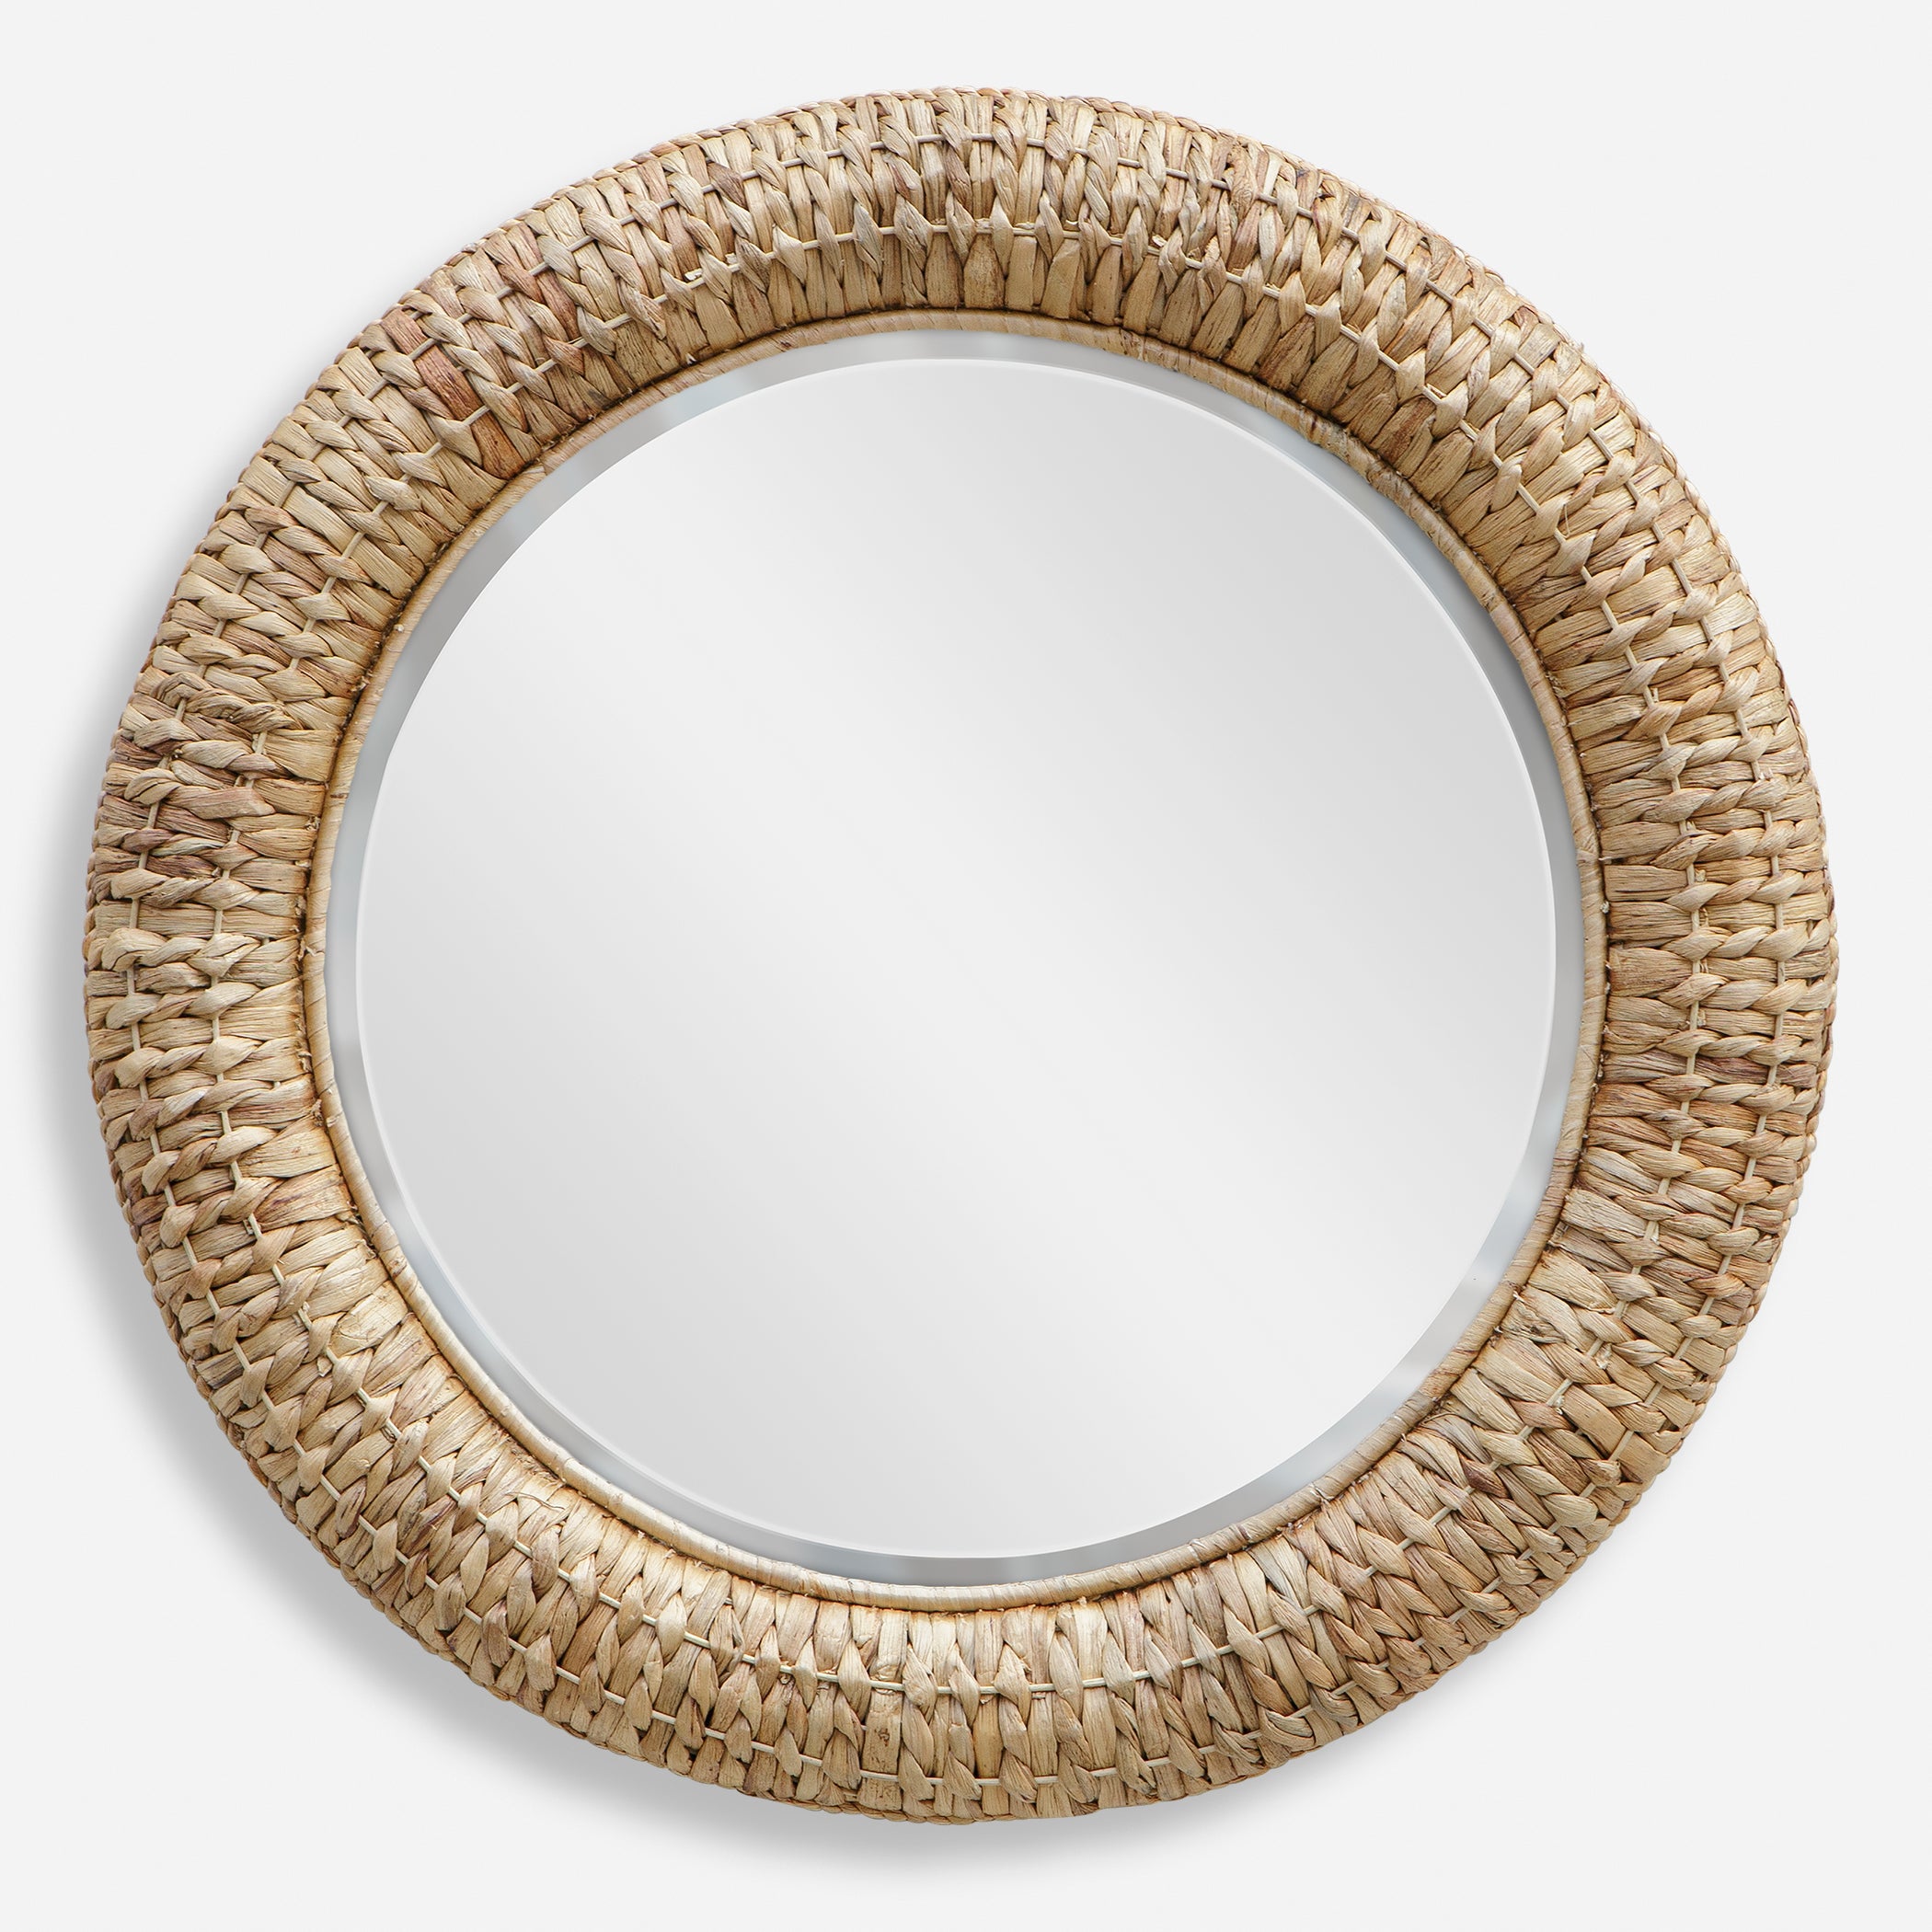 Uttermost Twisted Seagrass Seagrass Round Mirror Seagrass Round Mirror Uttermost   